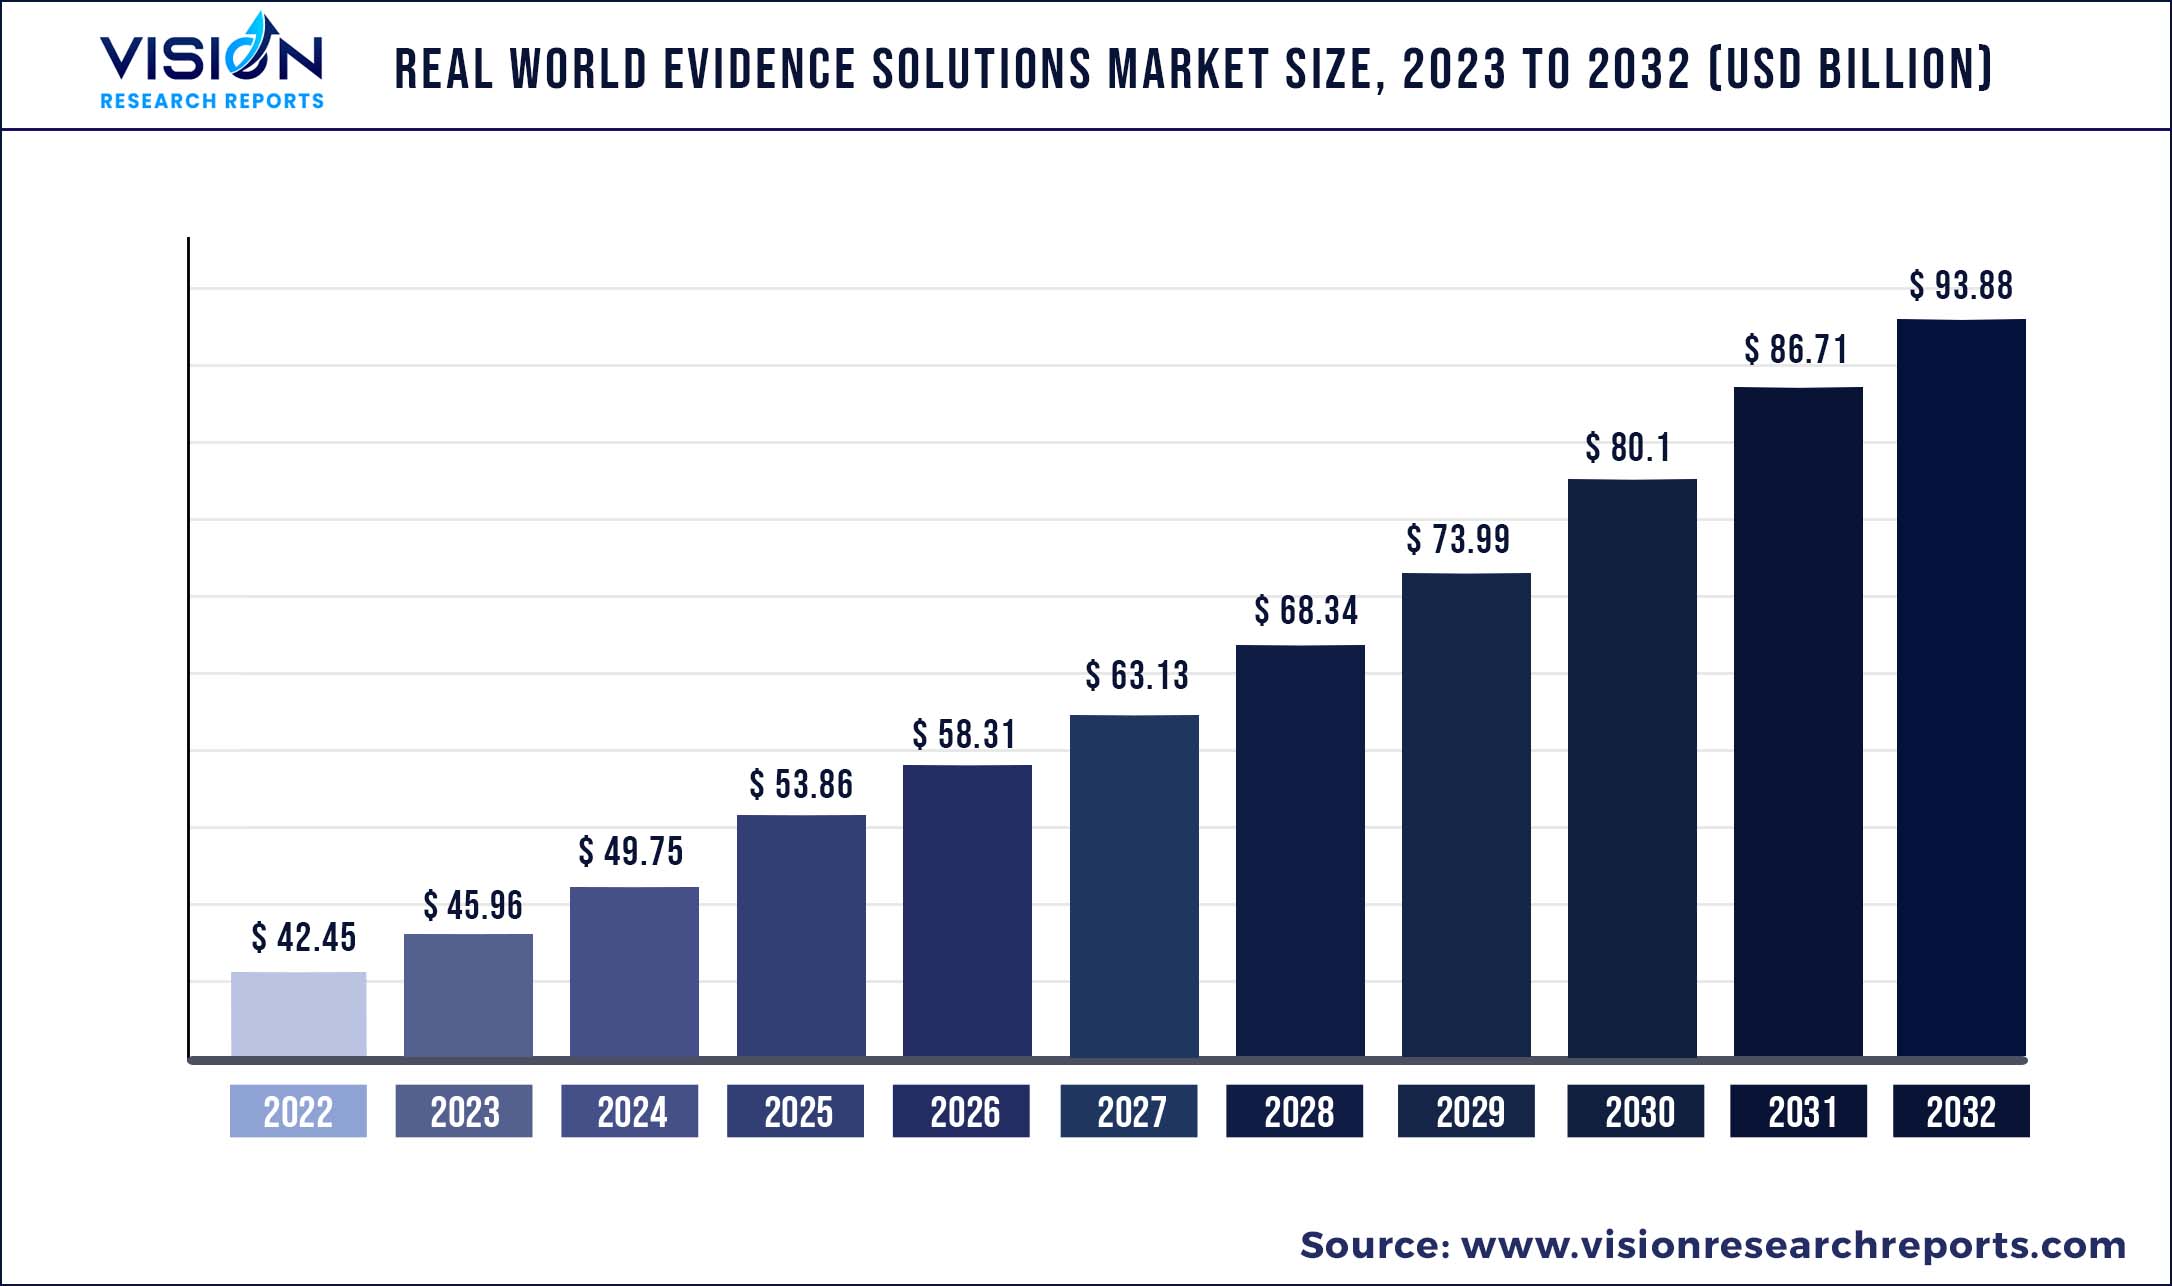 Real World Evidence Solutions Market Size 2023 to 2032